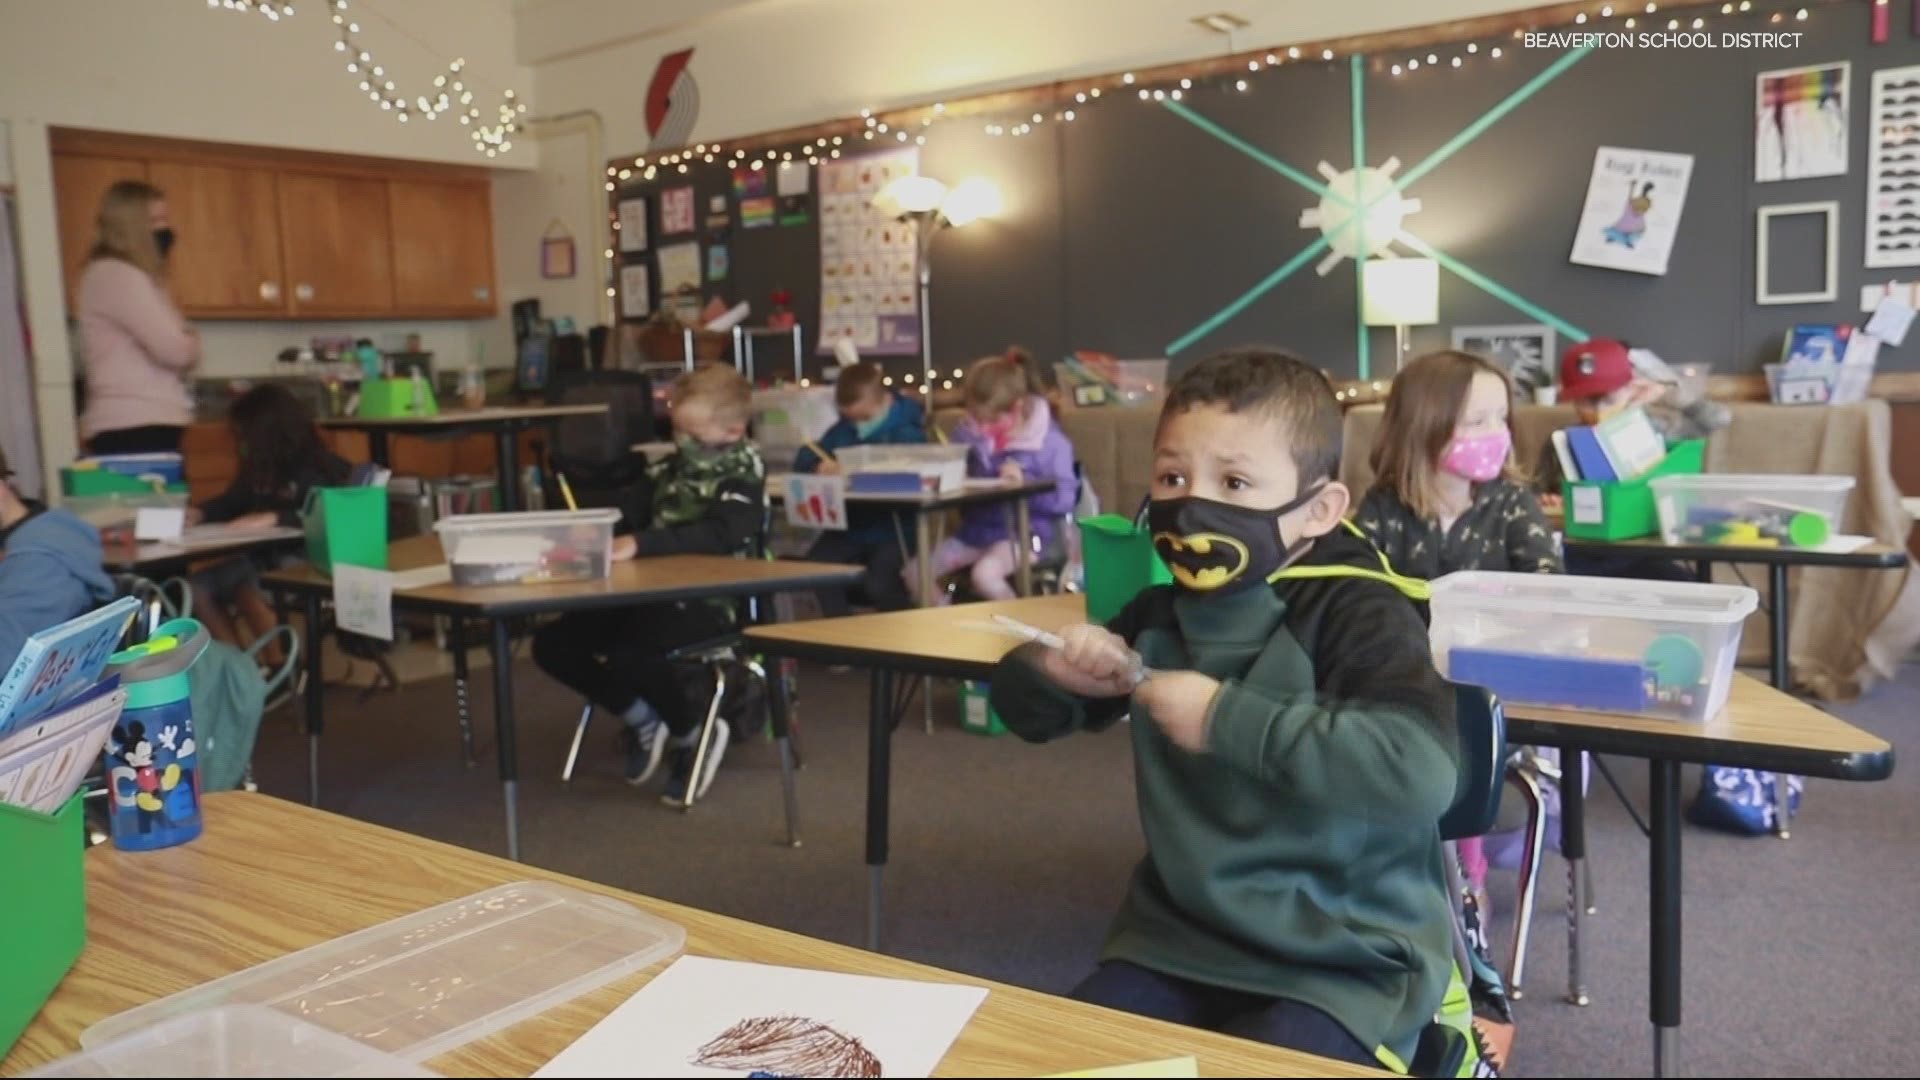 Here's a look at how Beaverton teachers felt about returning to limited in-person schooling.